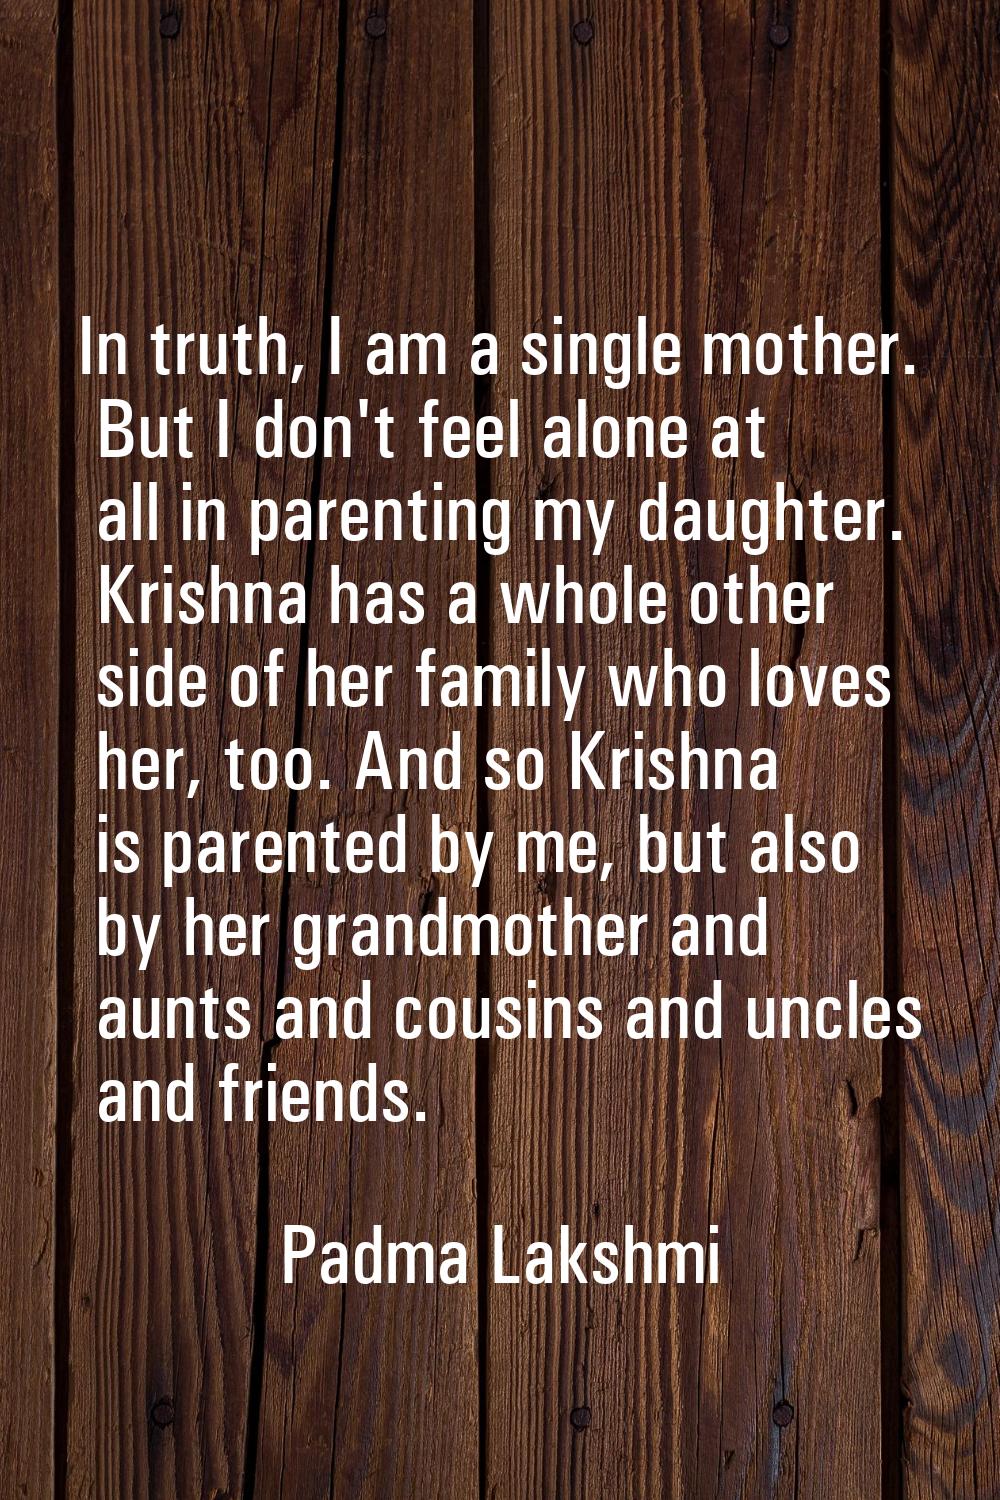 In truth, I am a single mother. But I don't feel alone at all in parenting my daughter. Krishna has